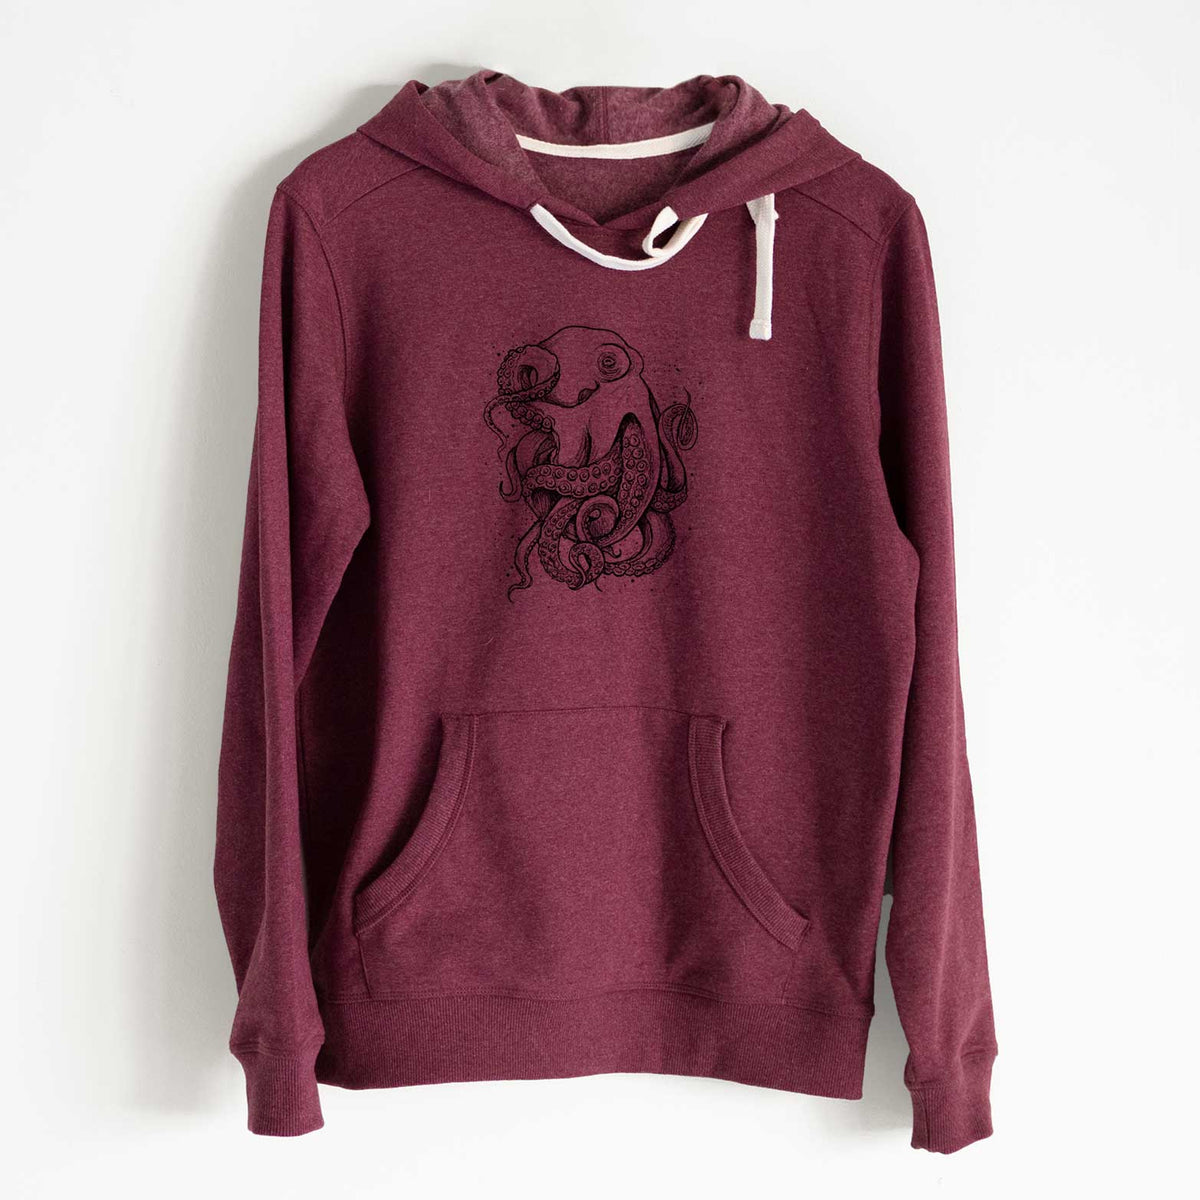 Octopus Vulgaris - Common Octopus - Unisex Recycled Hoodie - CLOSEOUT - FINAL SALE